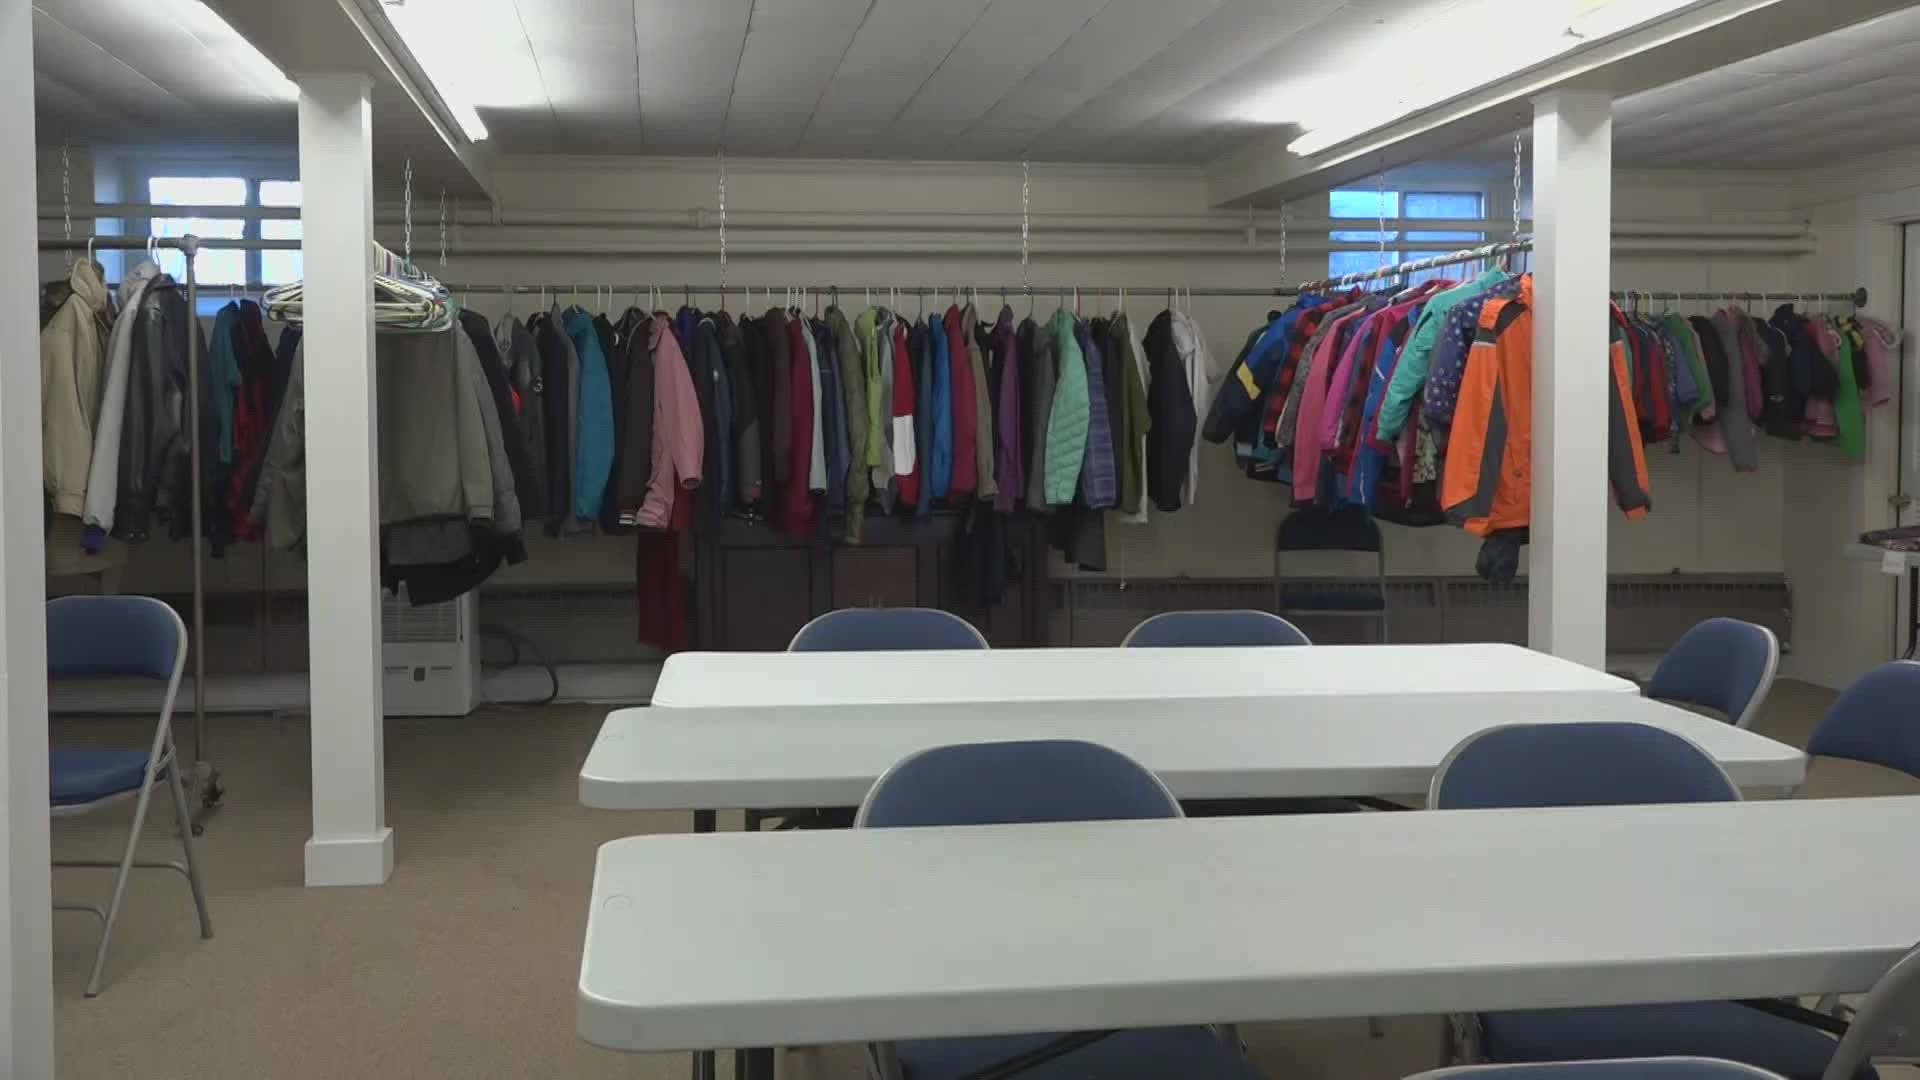 If you want to drop any coats off directly at the church, they ask that the coats be washed or dry cleaned before being dropped off.